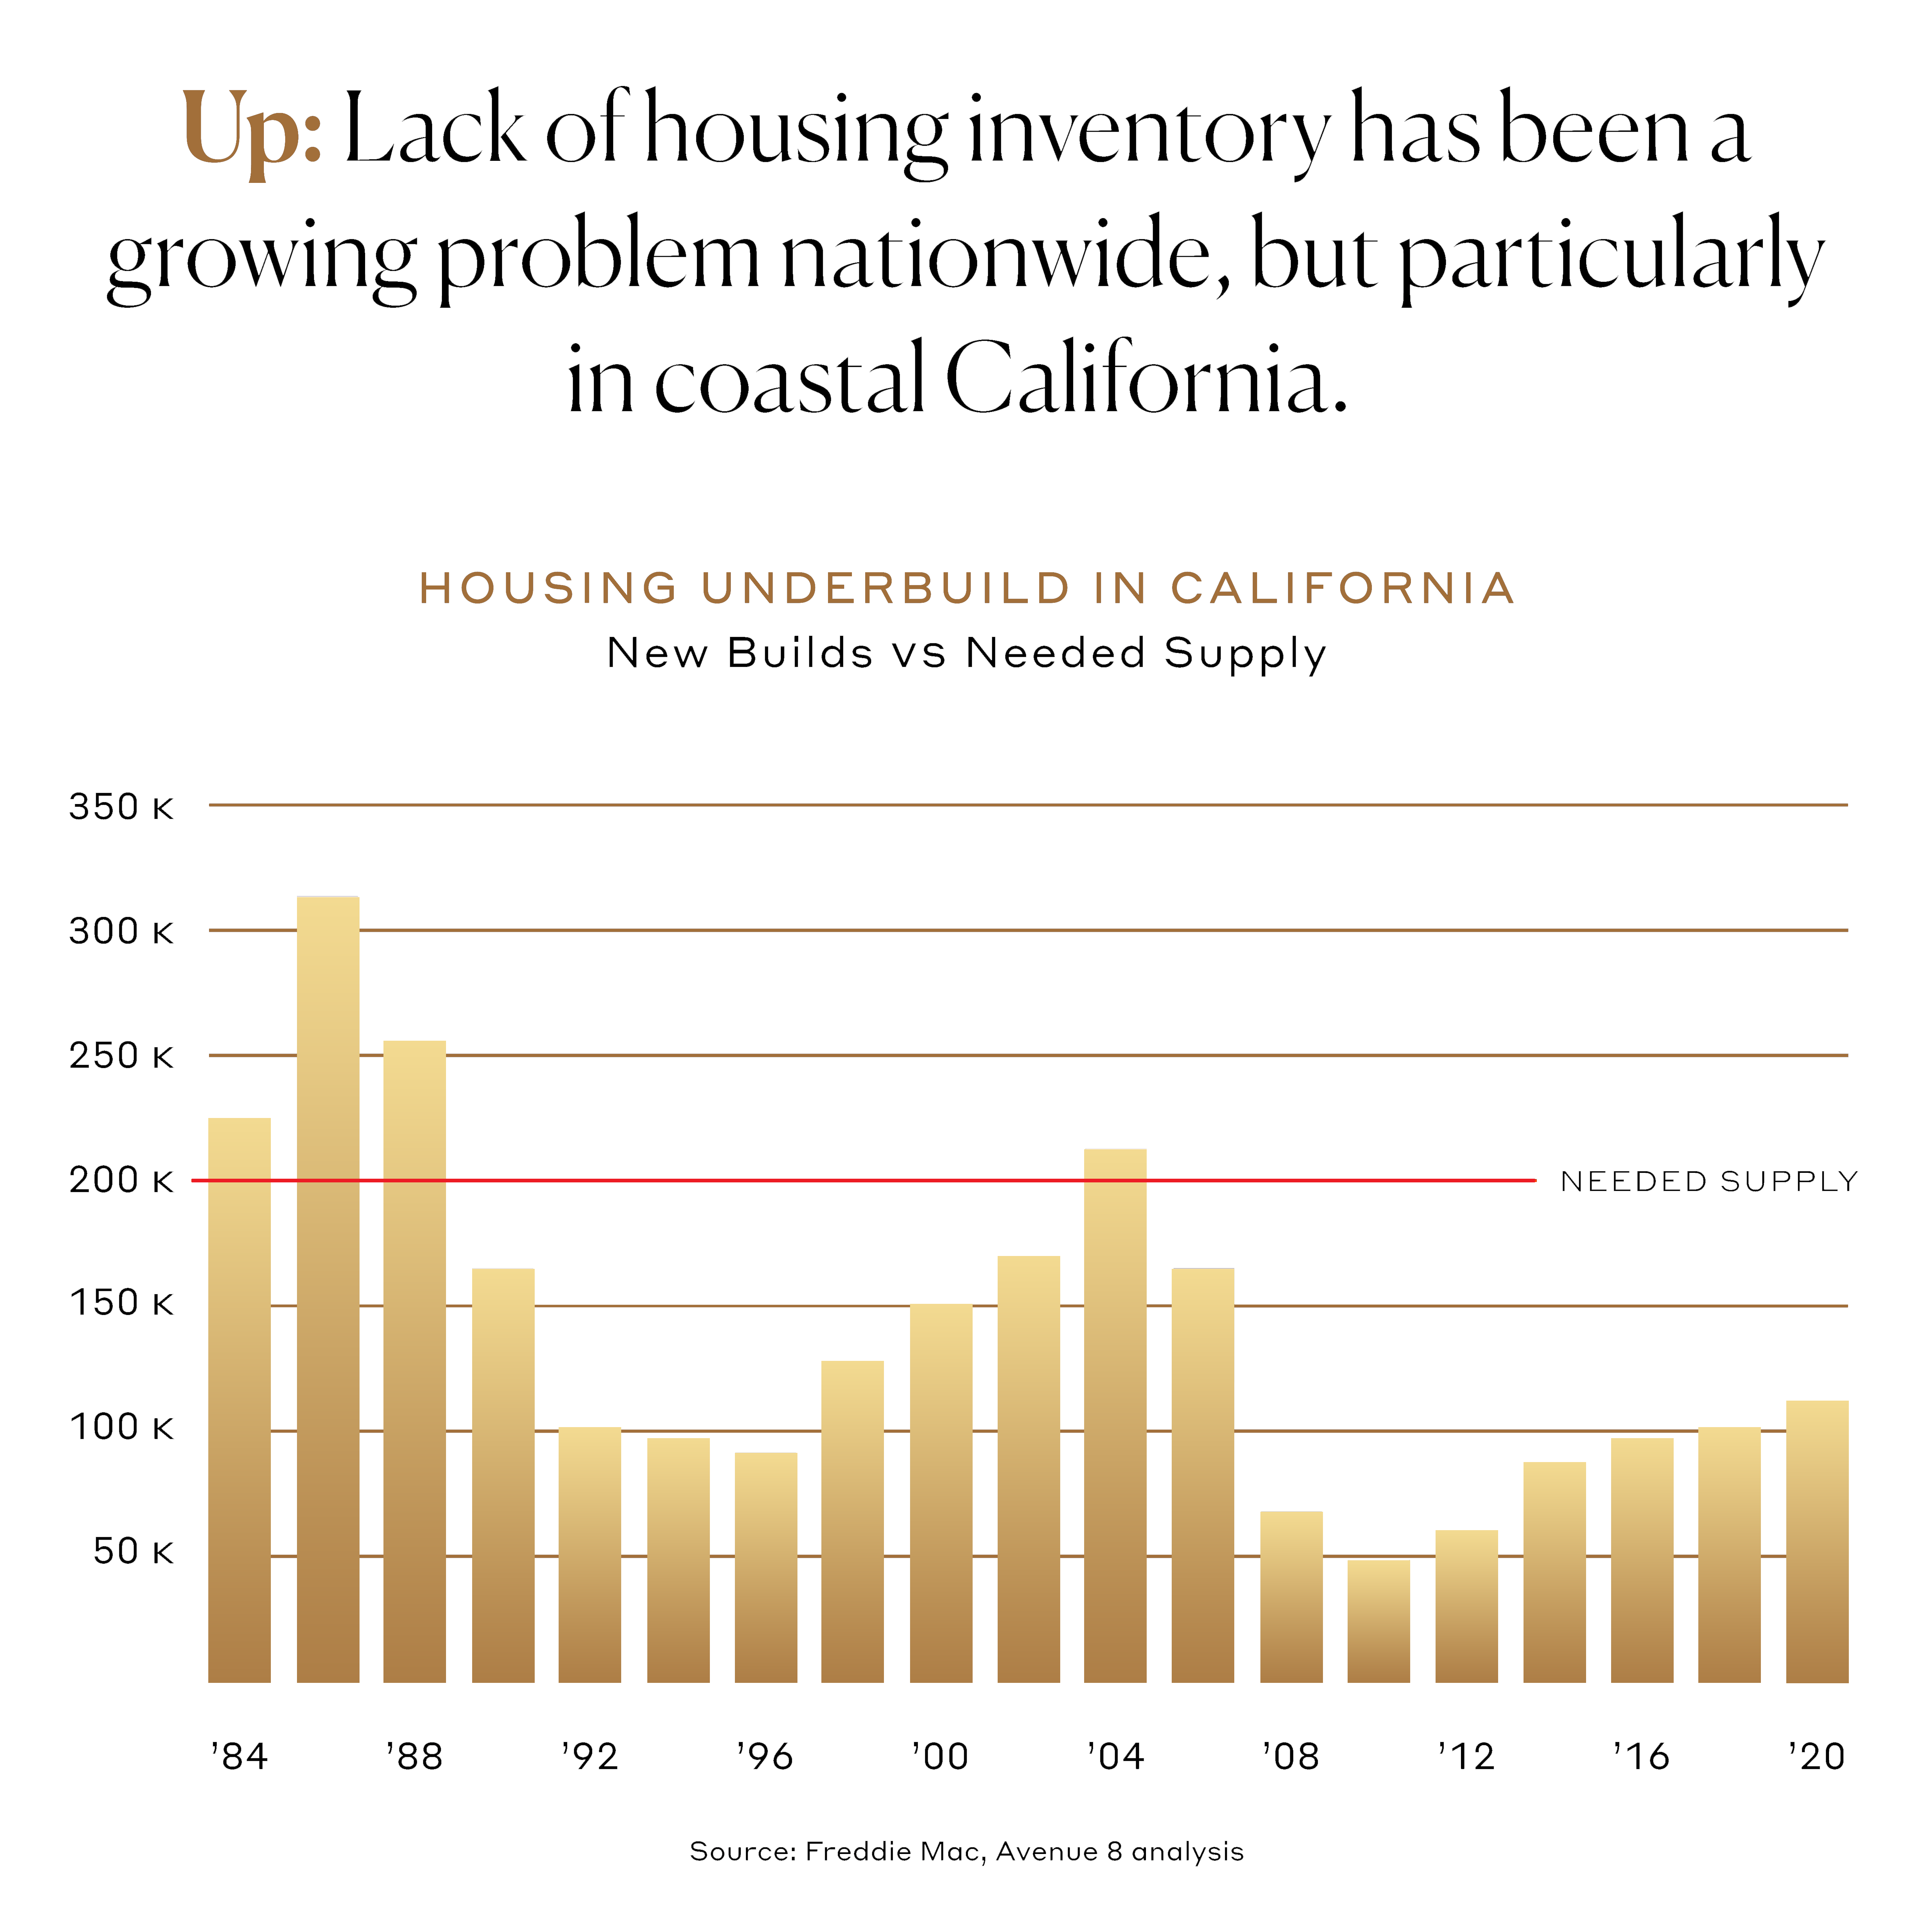 Up: Lack of housing inventory has been a growing problem nationwide, but particularly in coastal California.